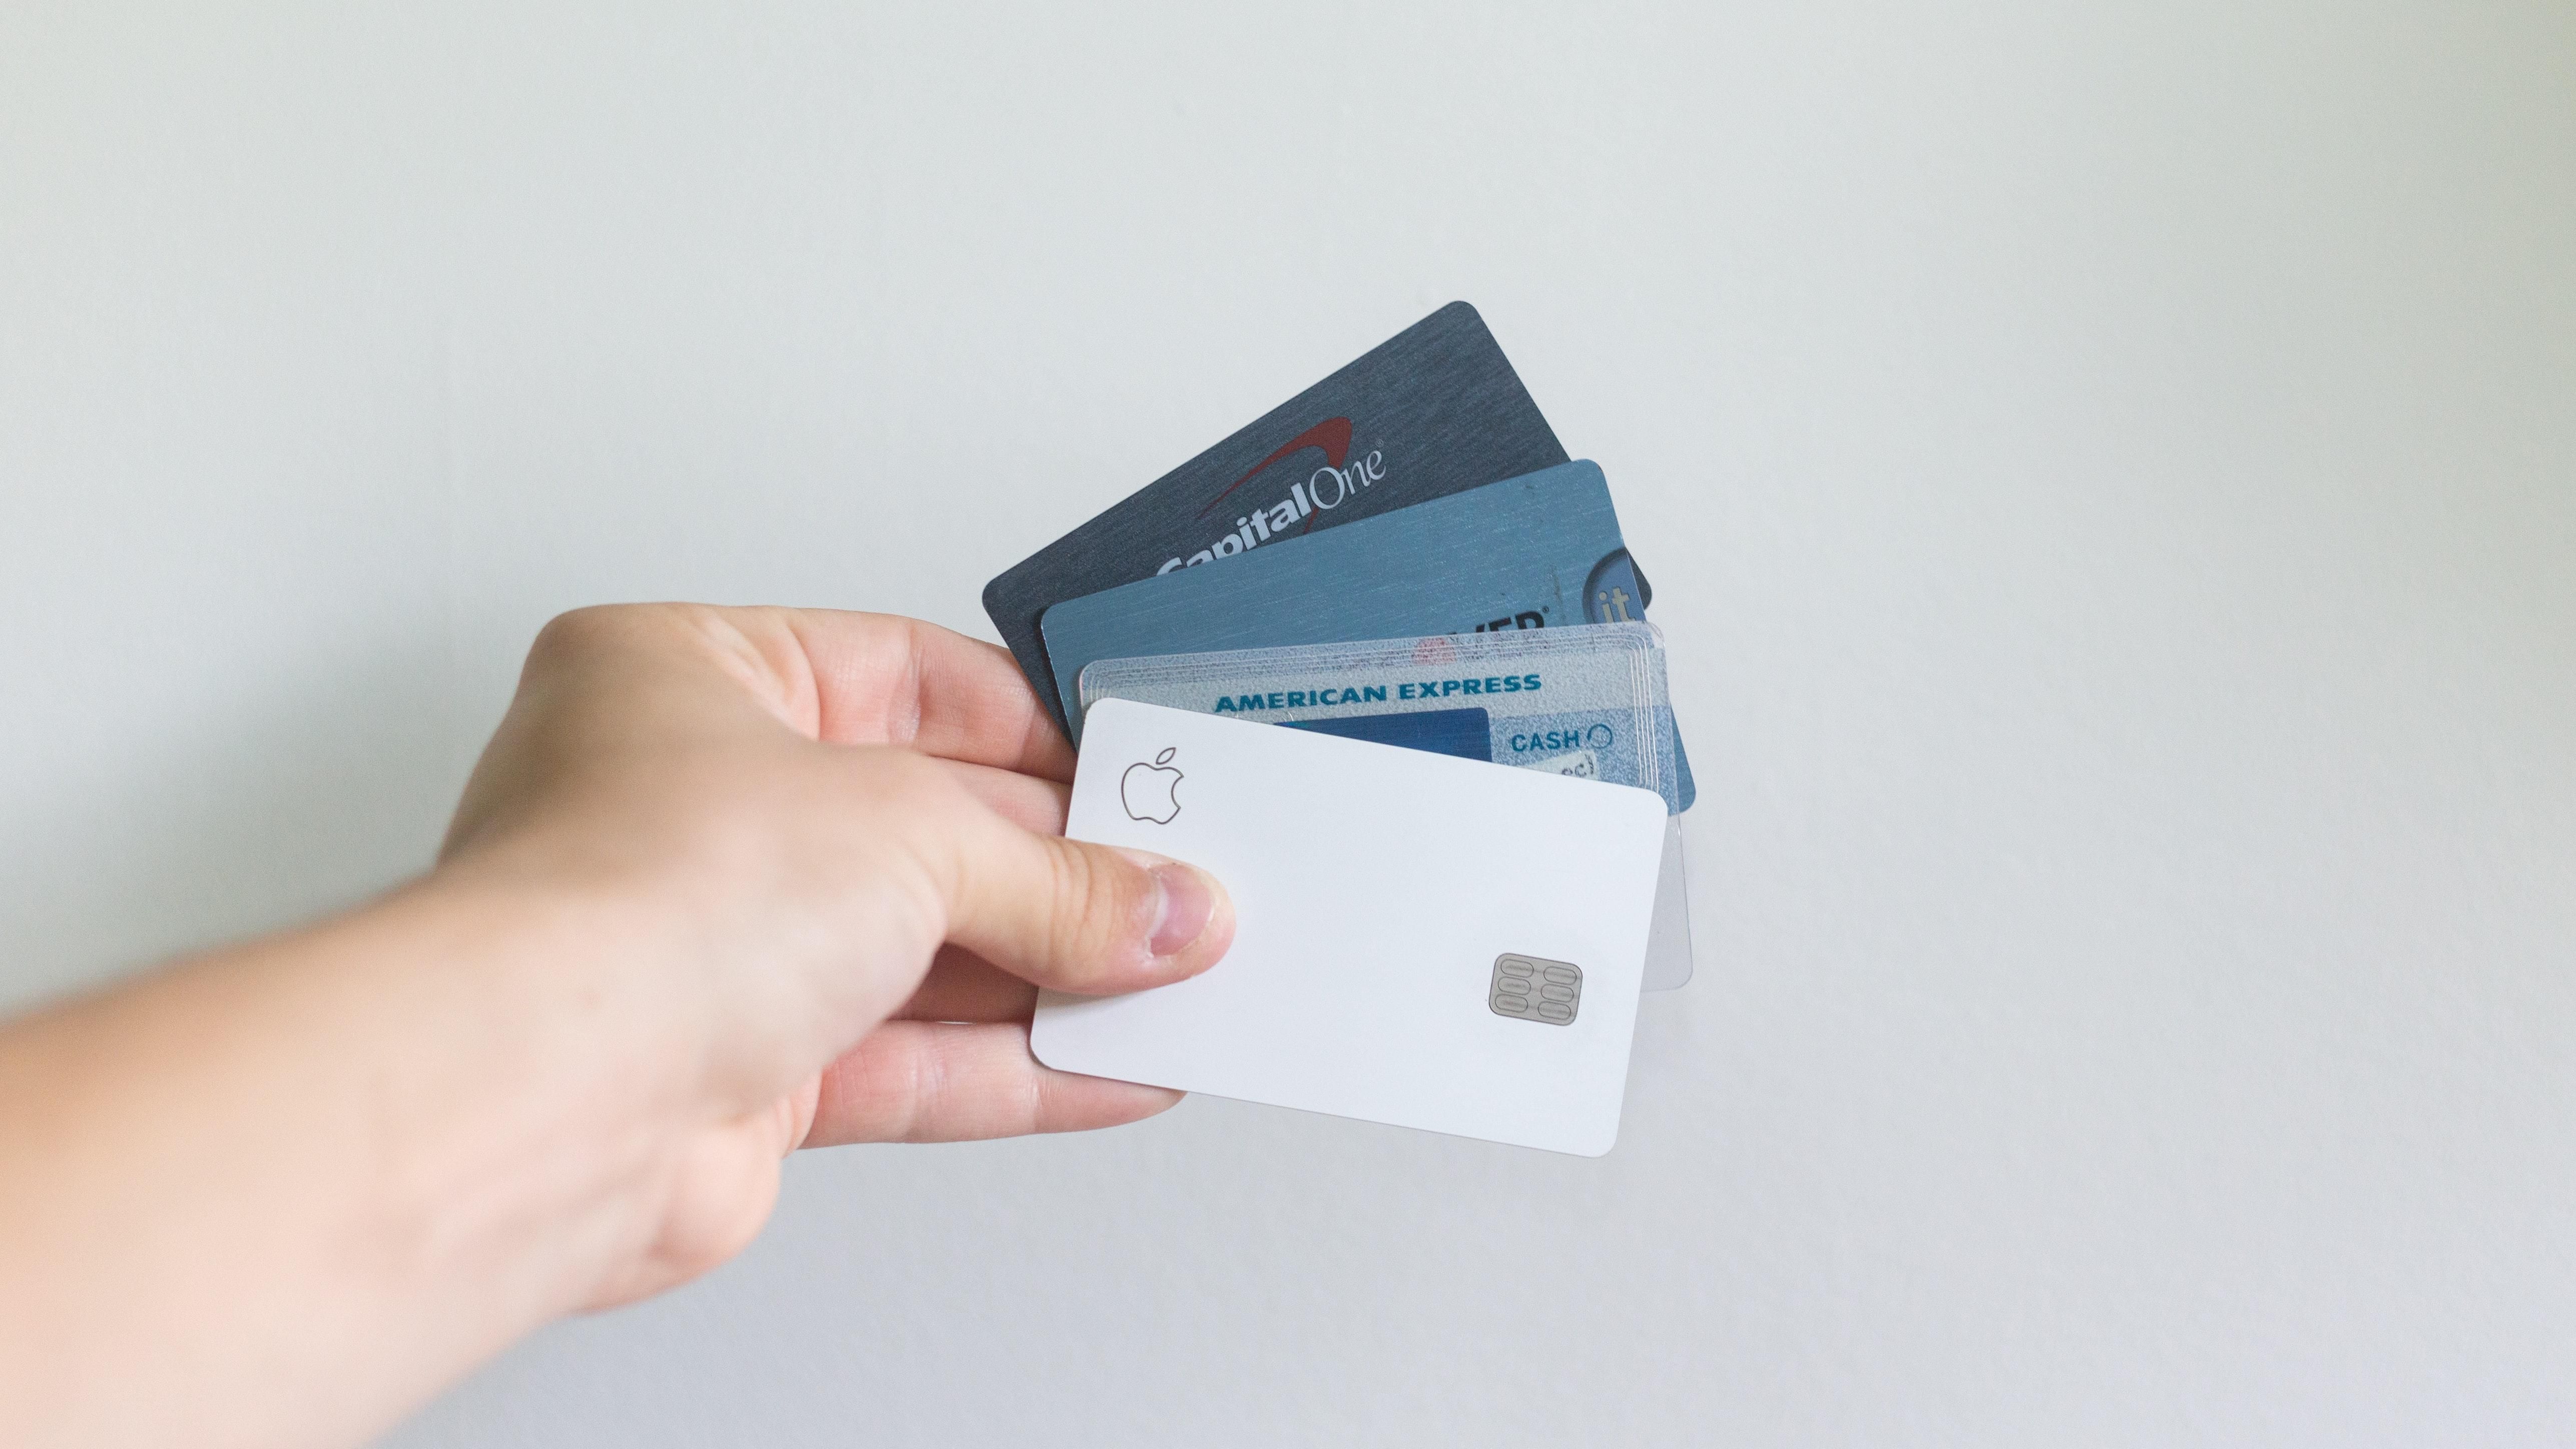 a person holding credit cards against a white background